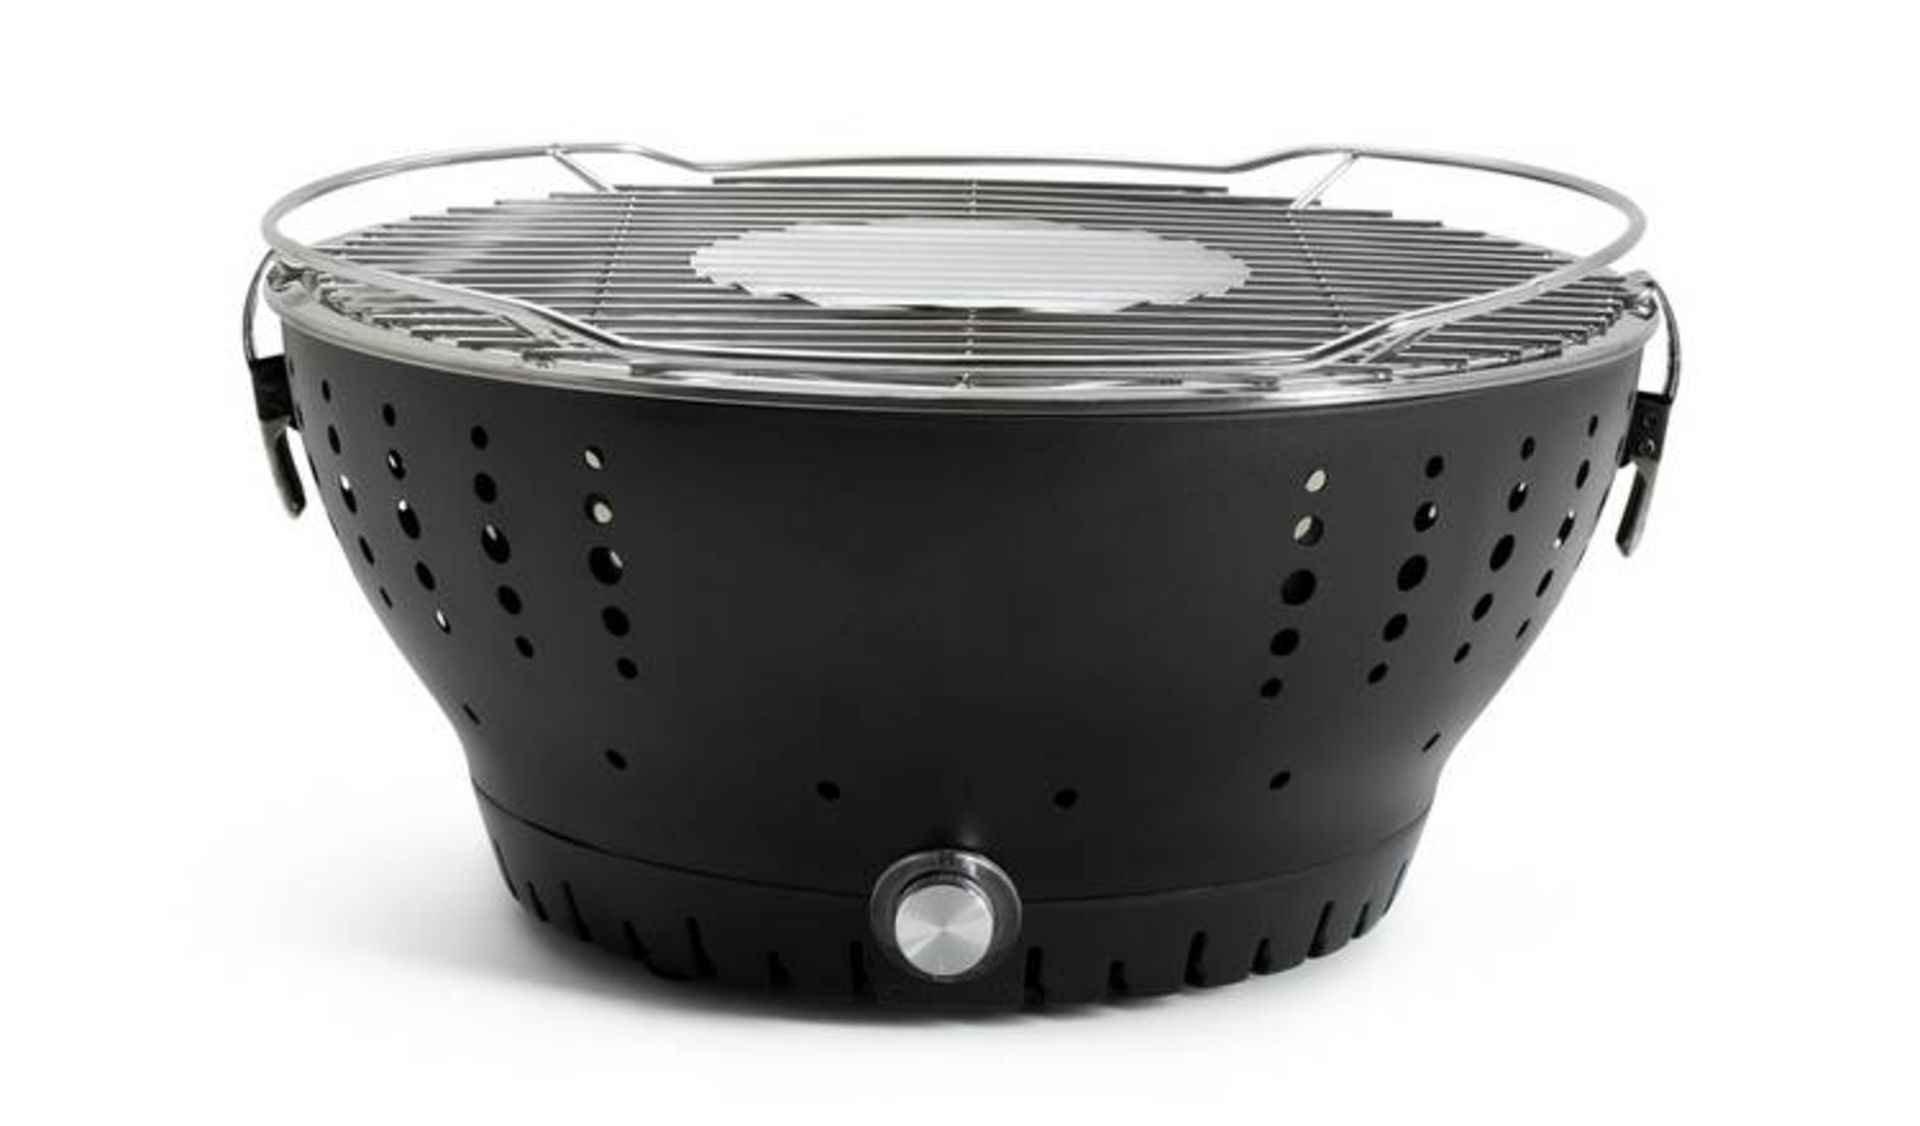 5 X BRAND NEW 38CM PREMIUM CHARCOAL BBQ WITH BUILT IN FANS RRP £89 EACH